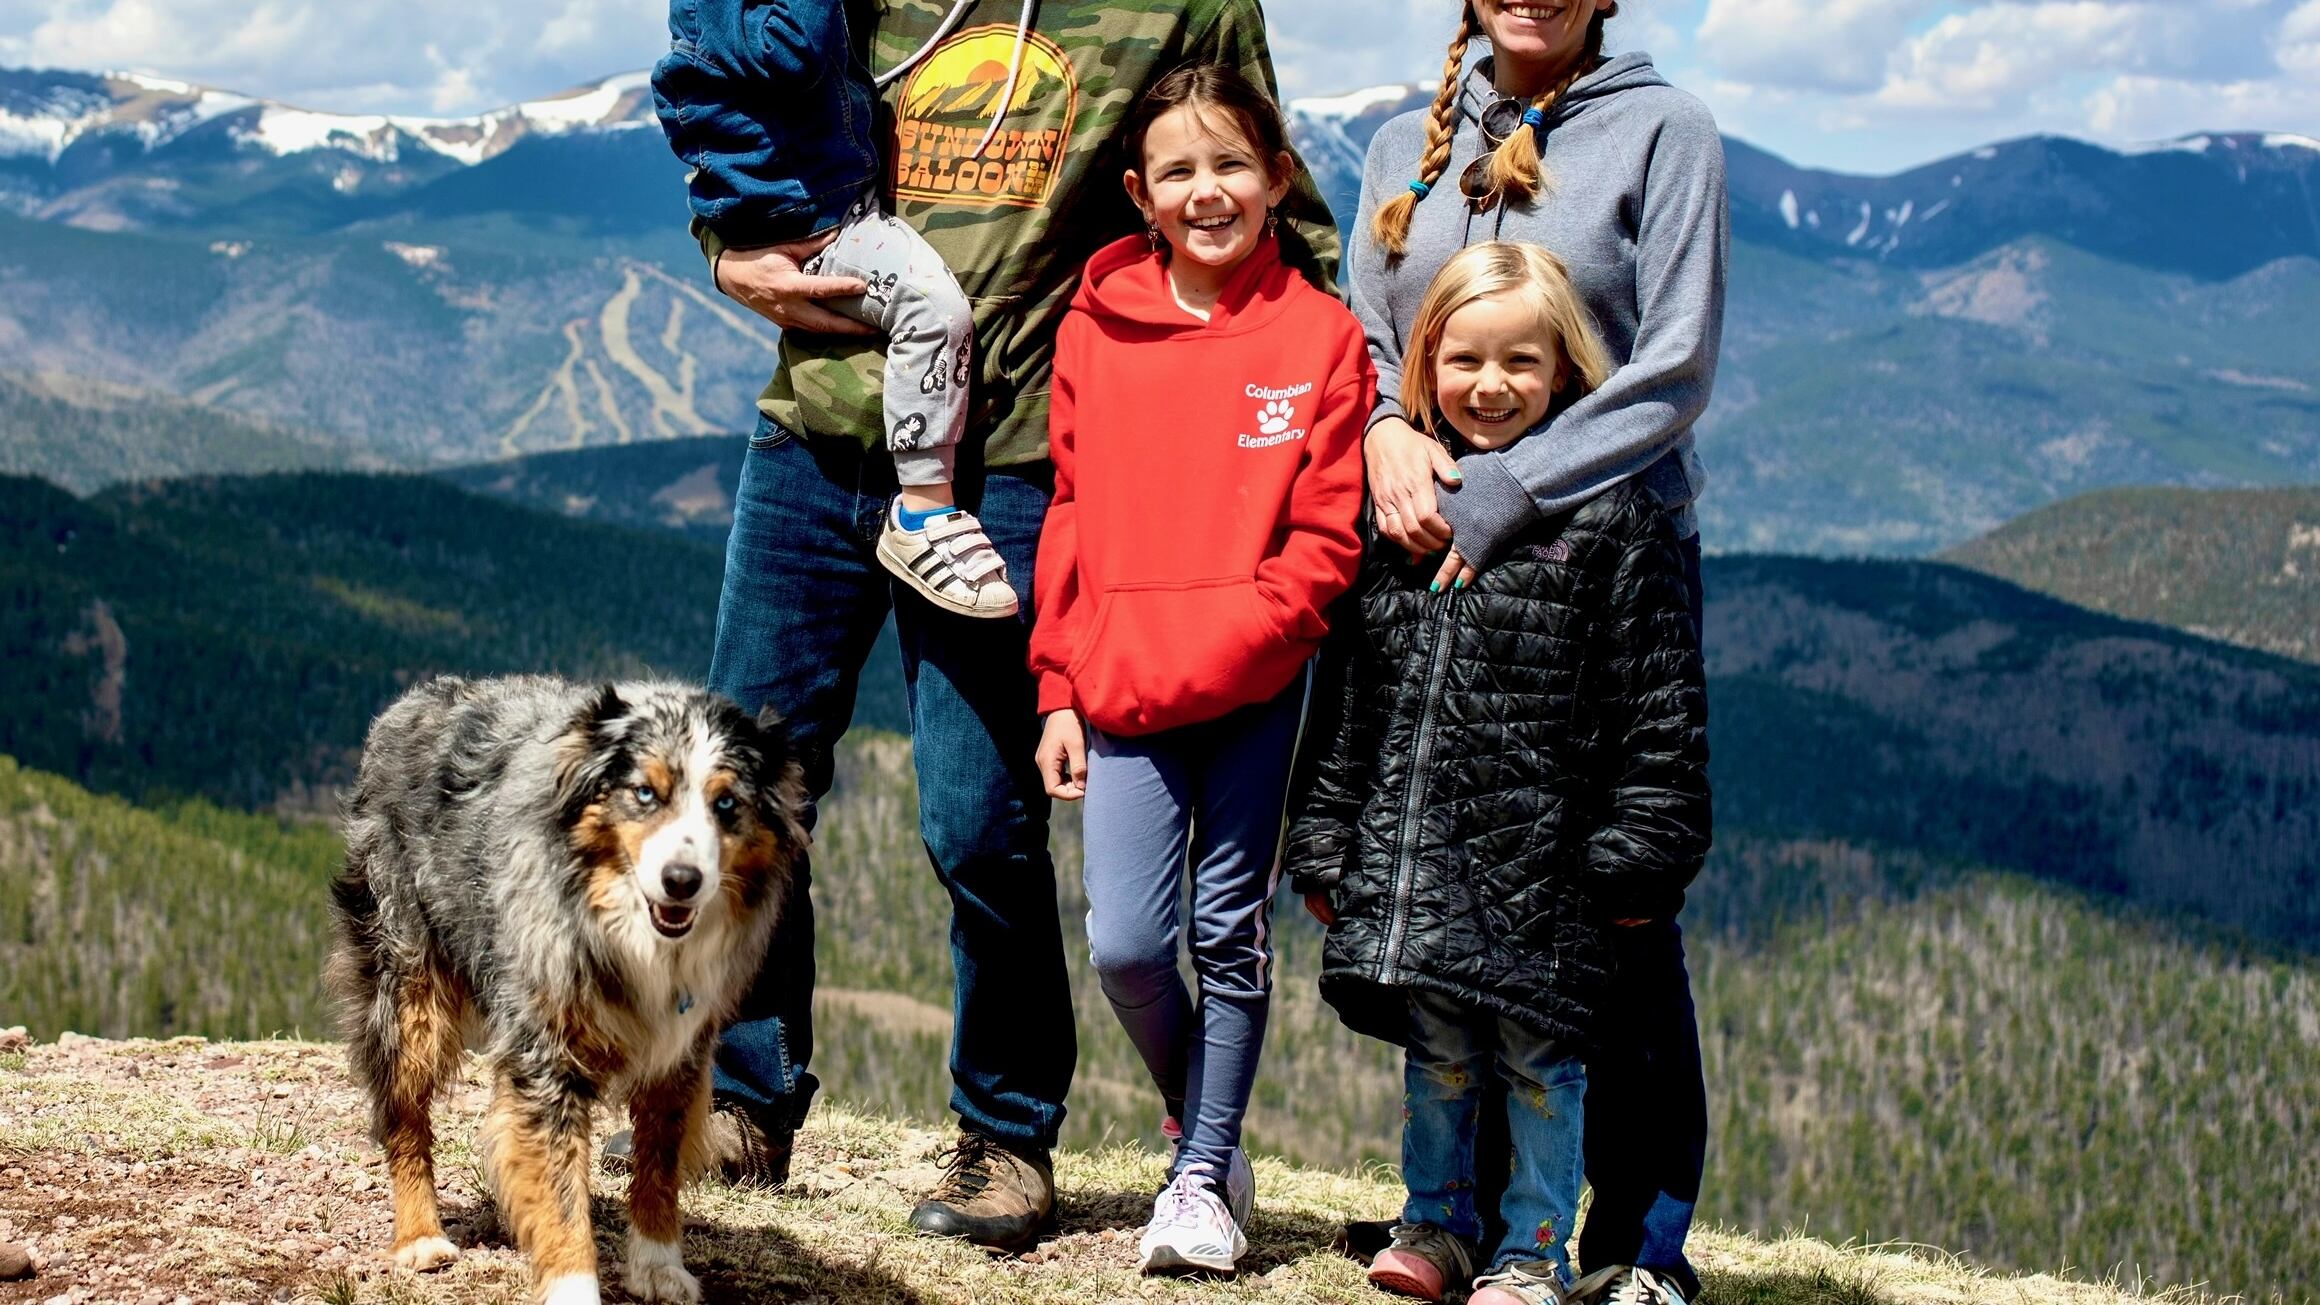 A dad, a mom, two daughters, and a son smile at the camera. They are outside with snow-capped mountains in the background.